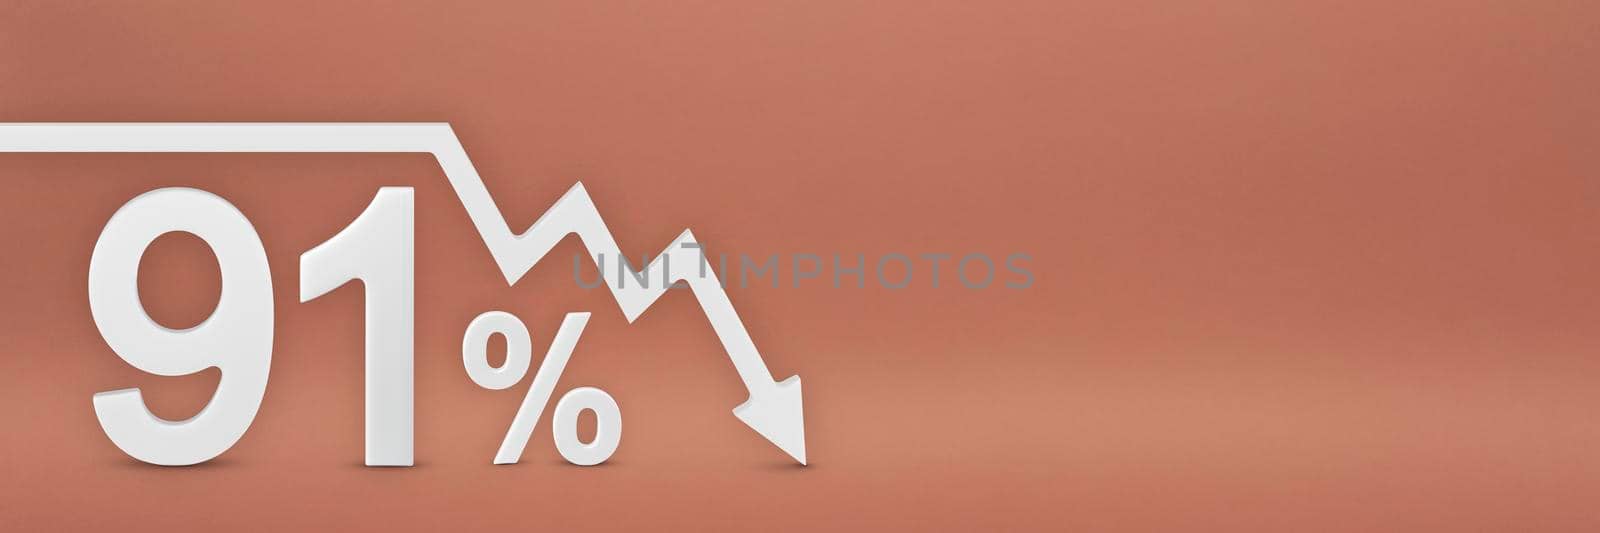 ninety-one percent, the arrow on the graph is pointing down. Stock market crash, bear market, inflation.Economic collapse, collapse of stocks.3d banner,91 percent discount sign on a red background. by SERSOL